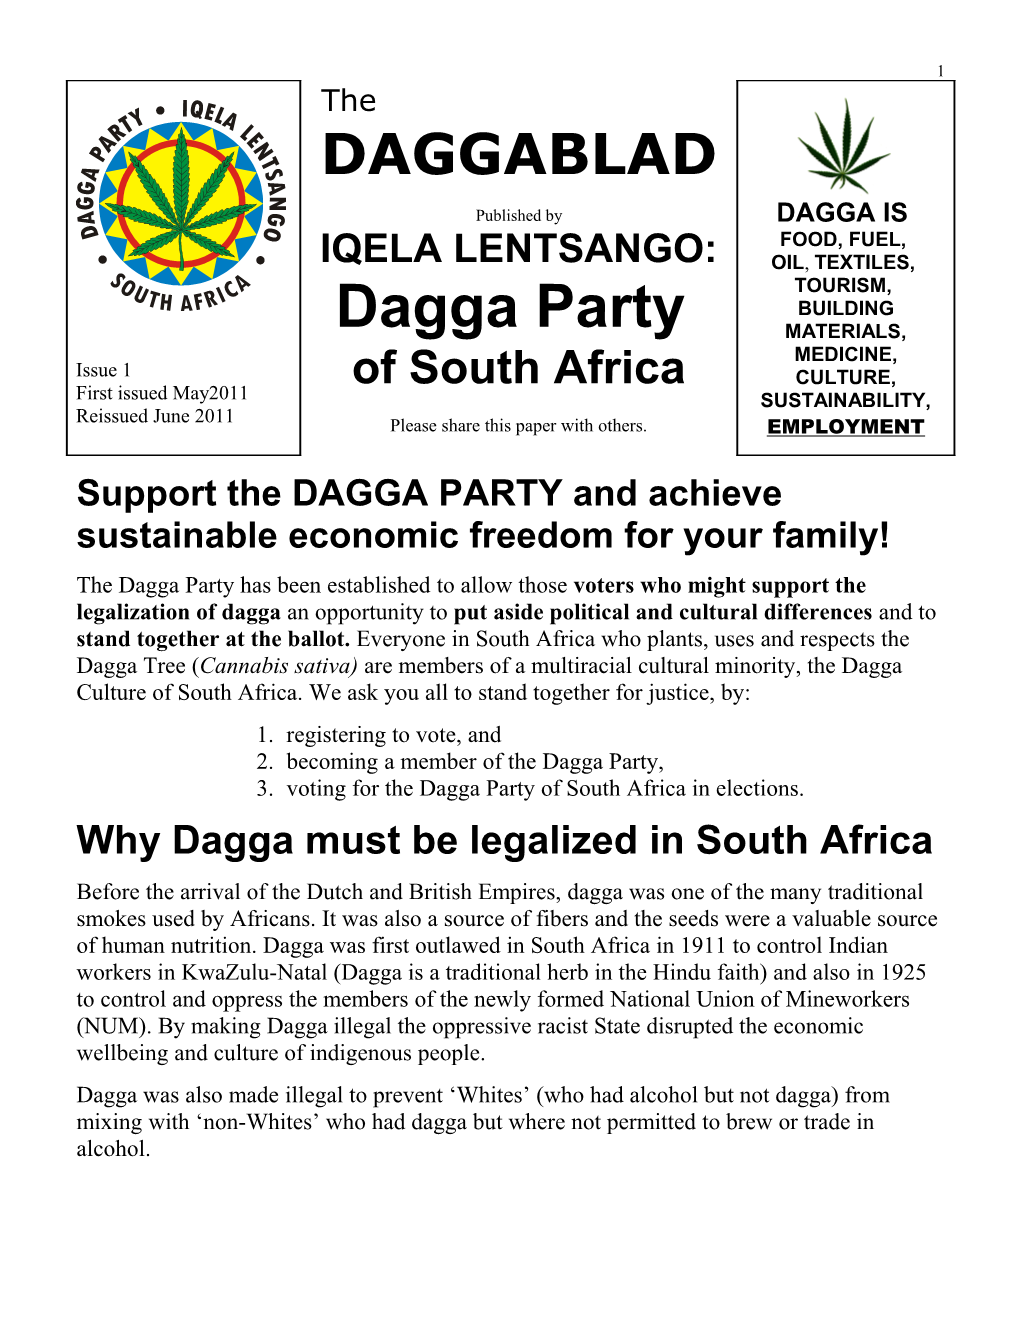 Support the DAGGA PARTY and Achieve Sustainable Economic Freedom for Your Family!